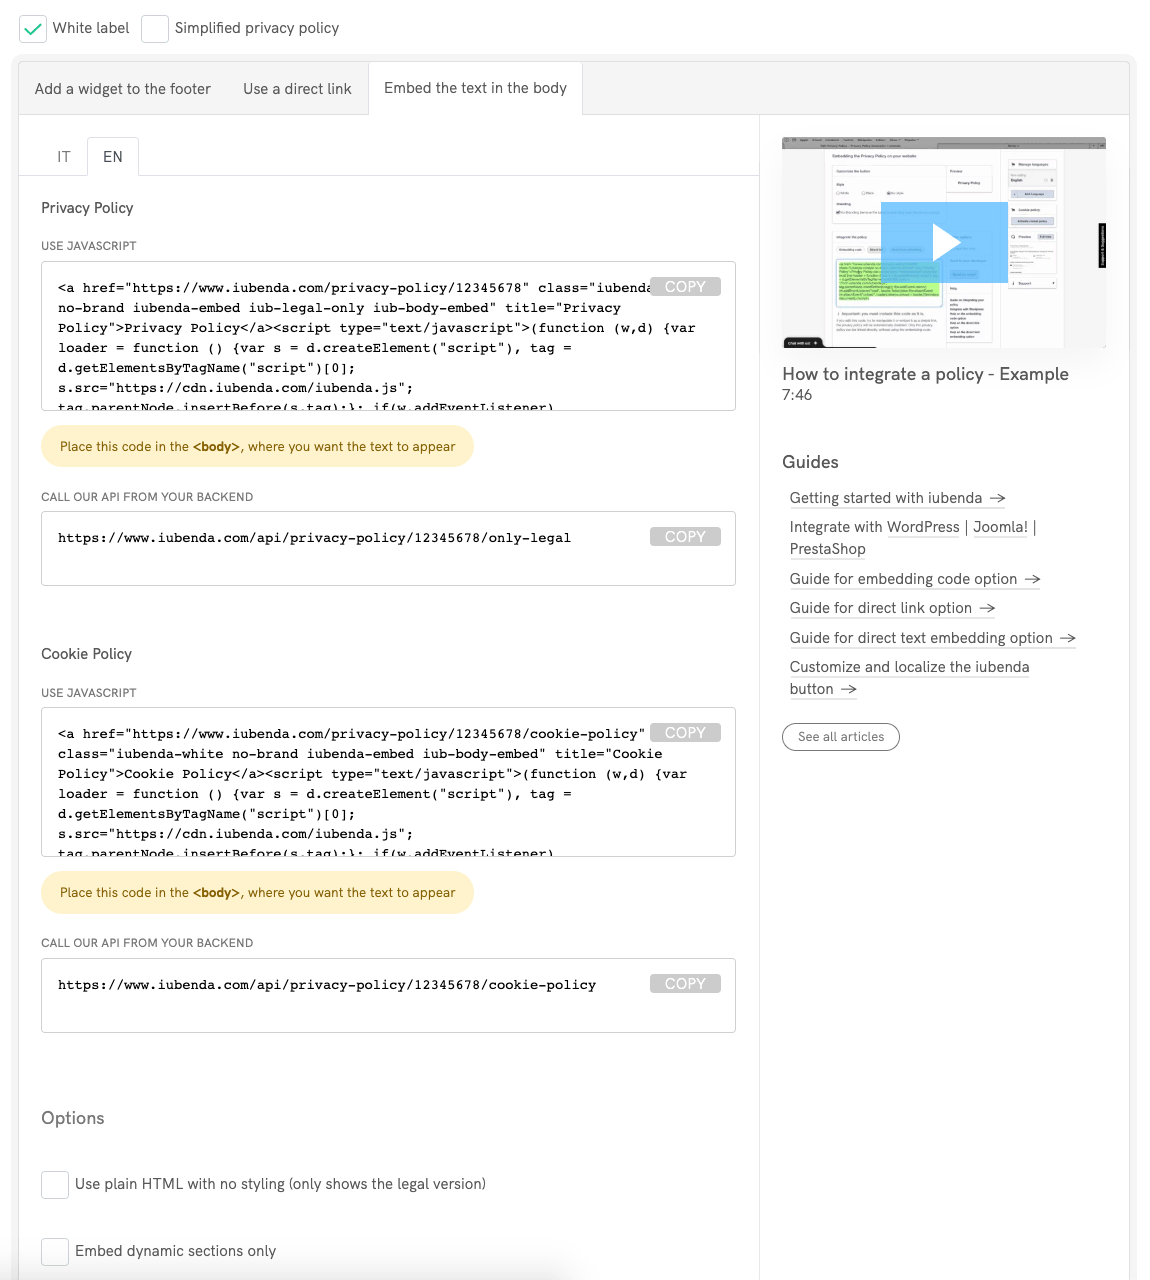 Privacy policy - Direct Text Embedding